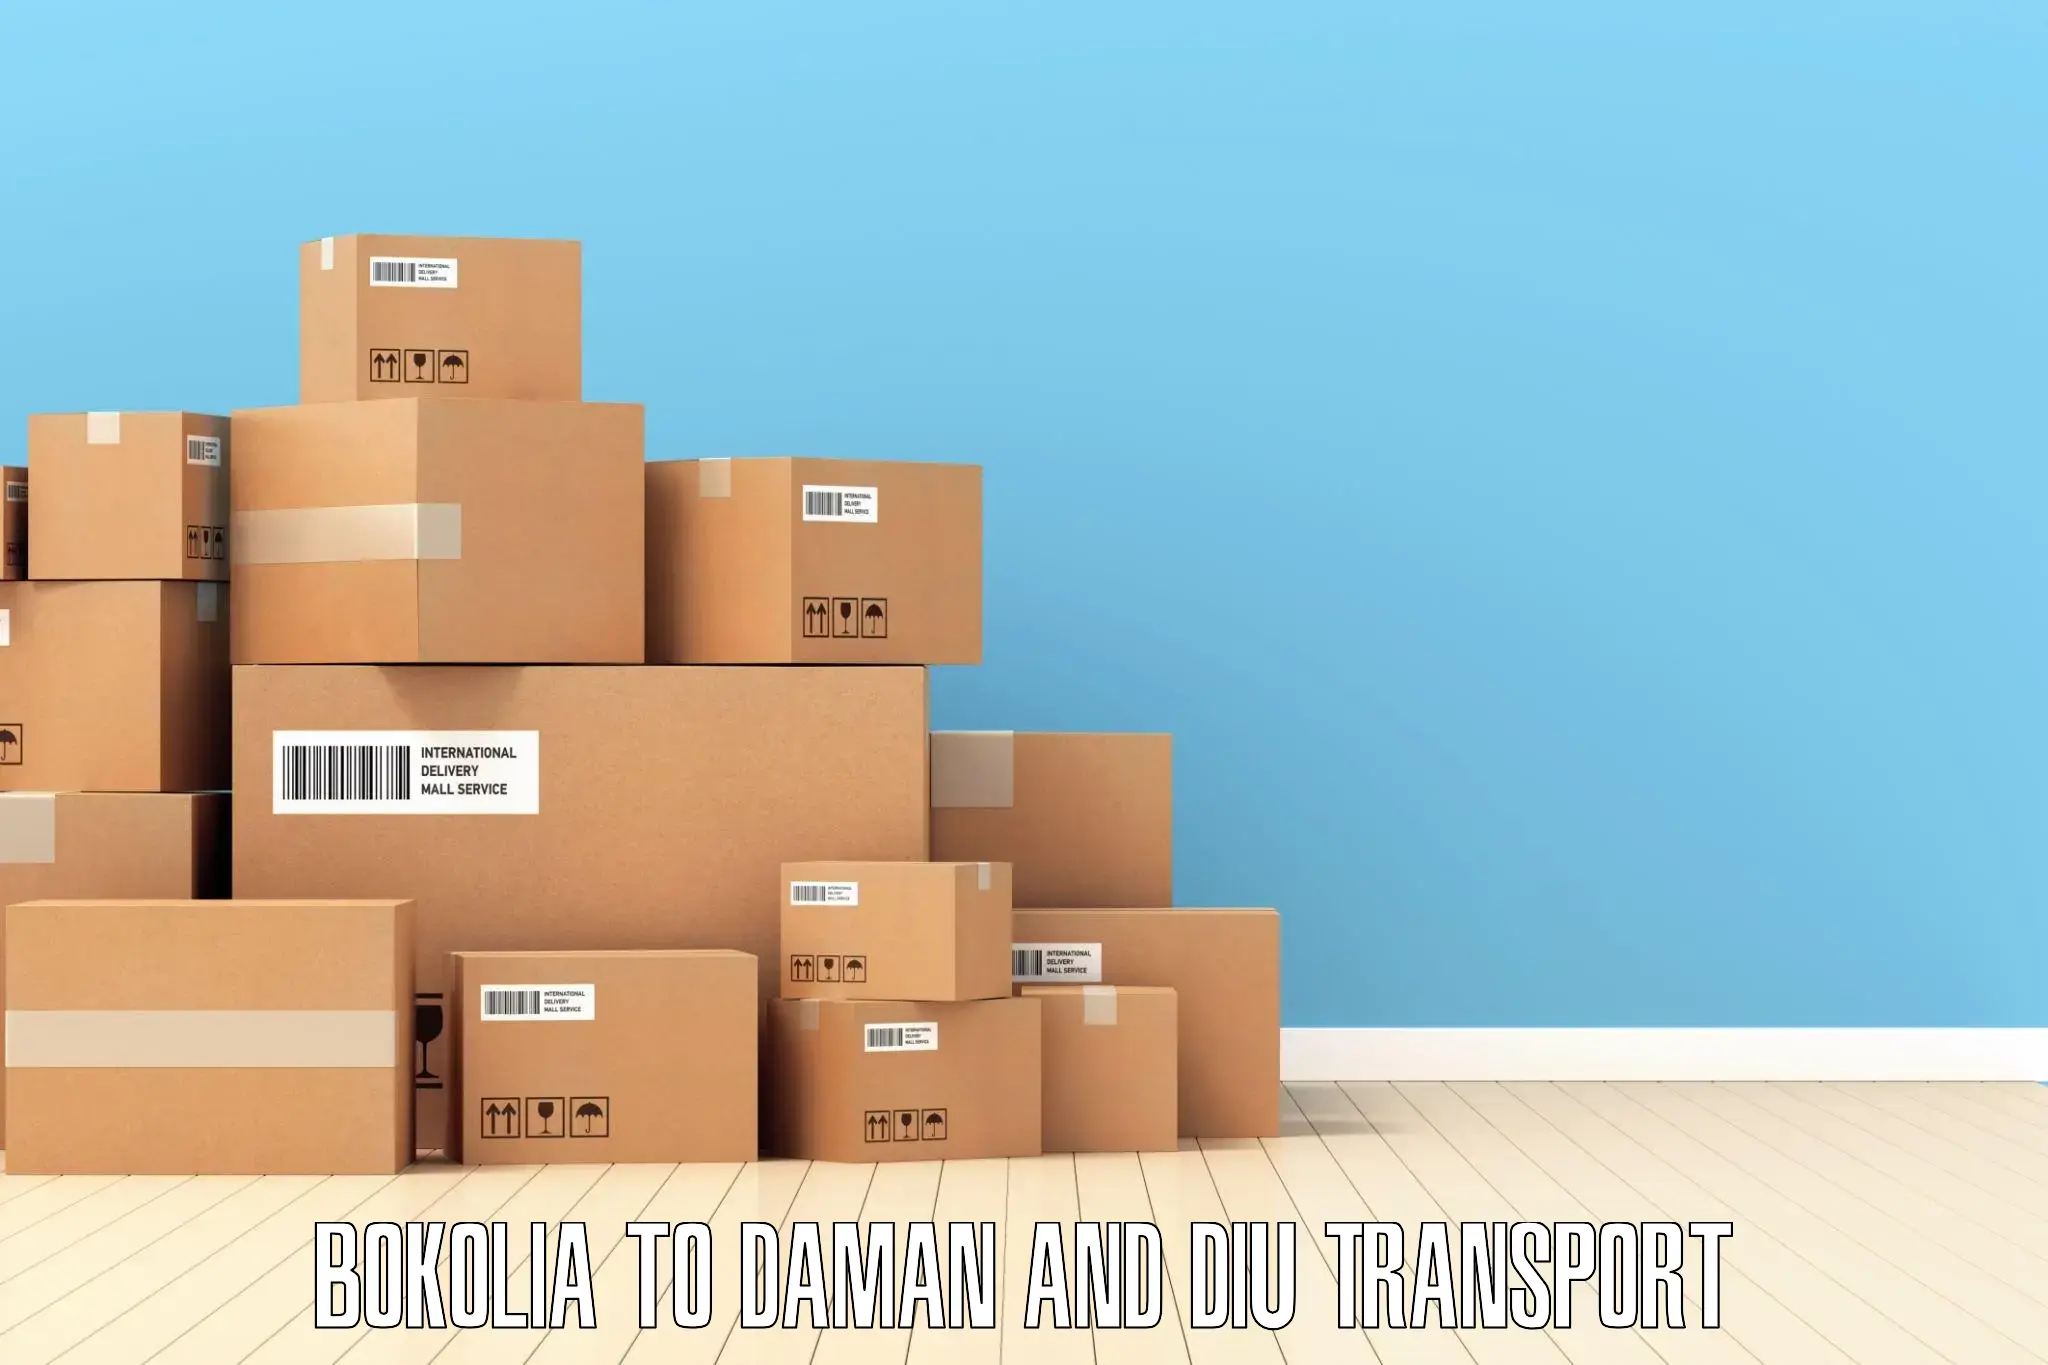 Delivery service Bokolia to Daman and Diu